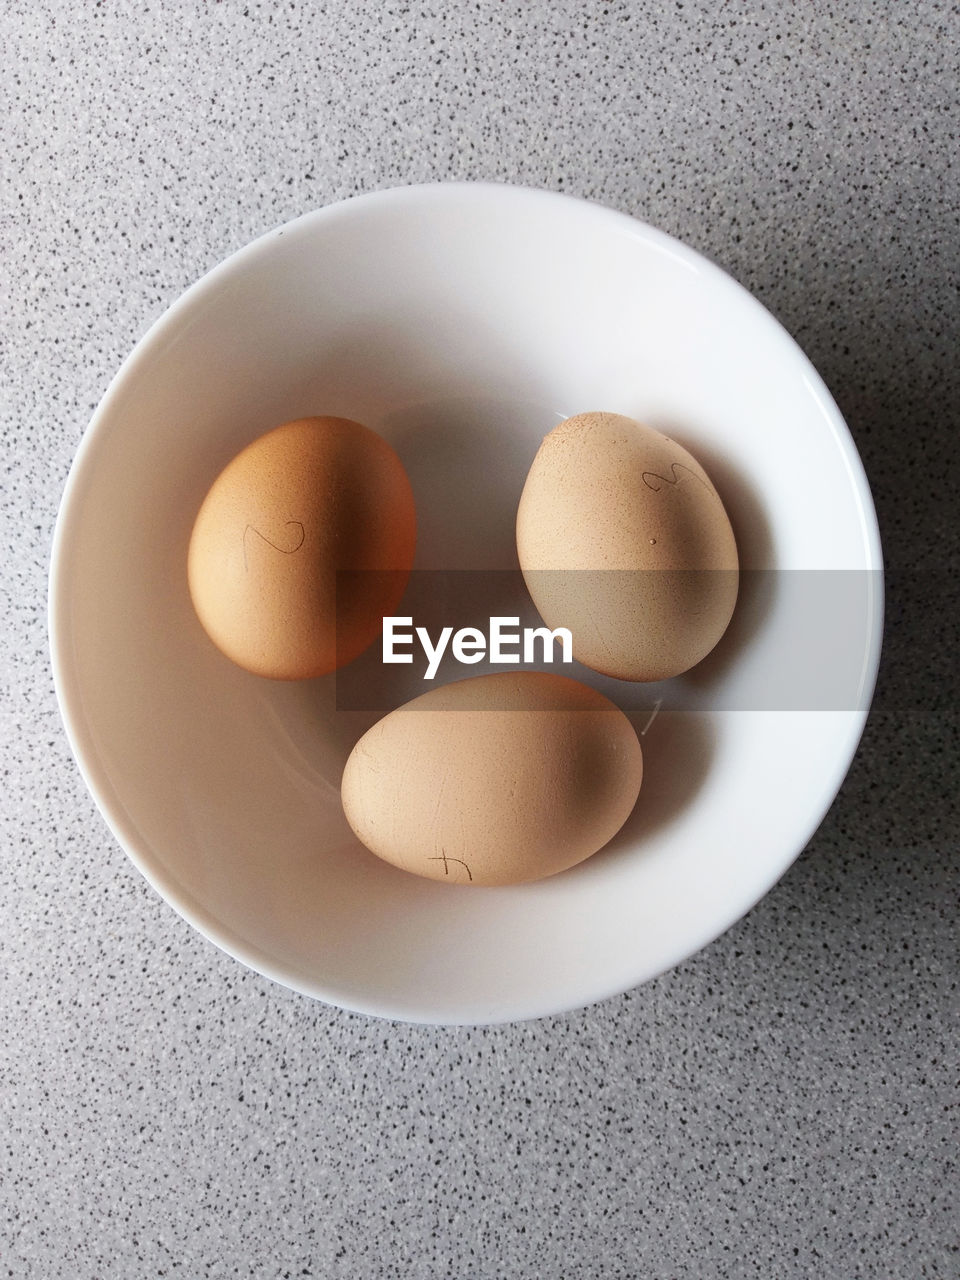 three eggs in a bowl - 2, 3, 4 3 Breakfast Animal Egg Bowl Breakfast Brown Brown Color Close-up Egg Food Food And Drink Forms And Shapes Fragility Freshness Healthy Eating Minimalism Numbers Oval Still Life Three Vulnerability  Wellbeing